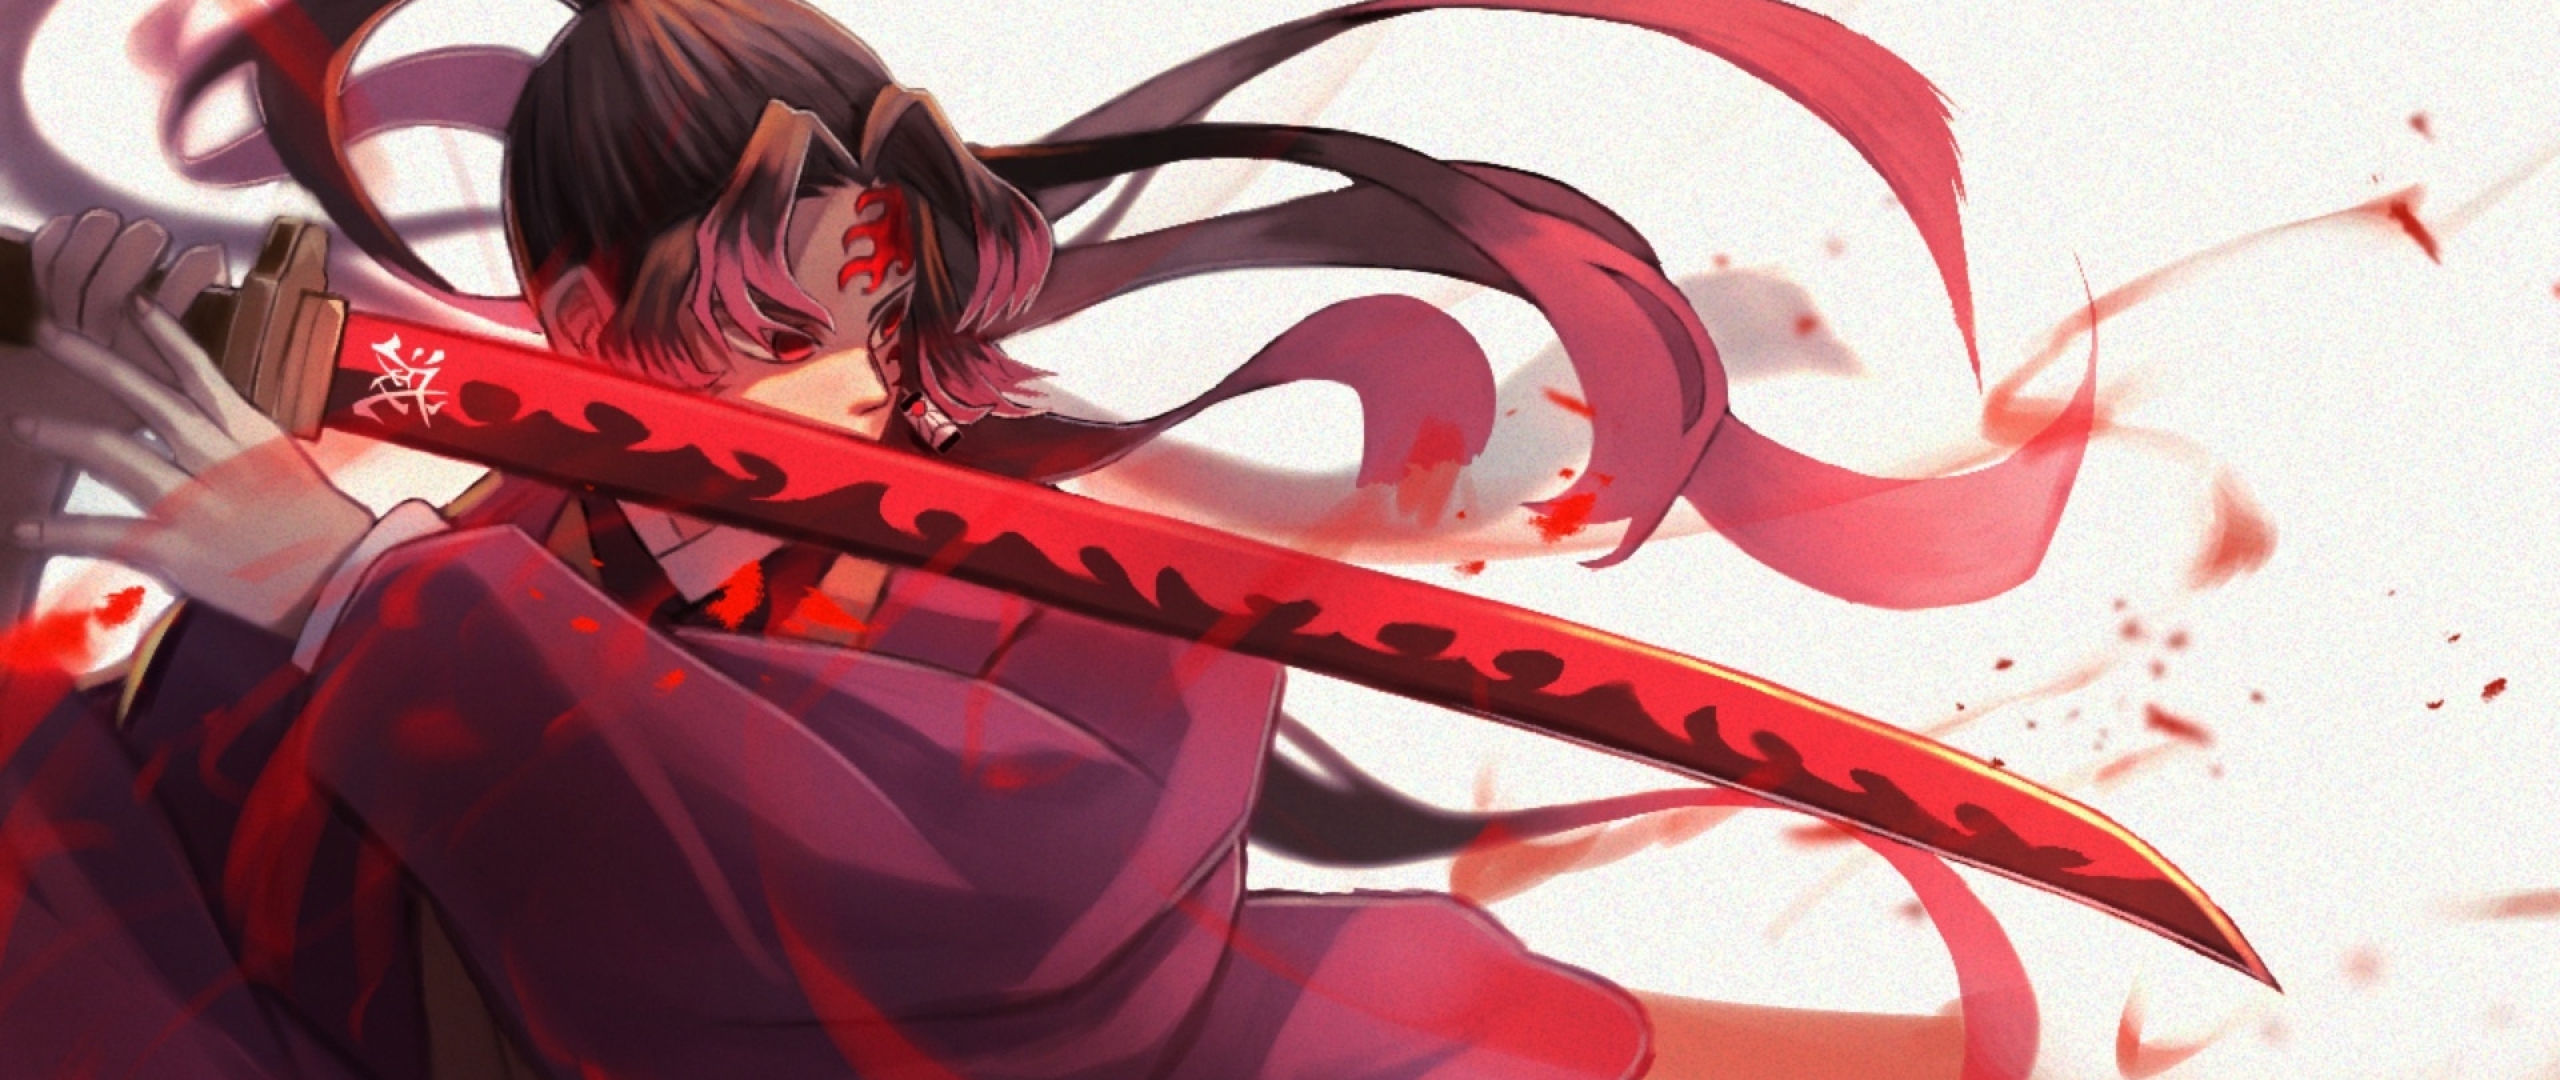 Cool Red Anime Backgrounds : Dark red anime backgrounds desktop wallpapers: